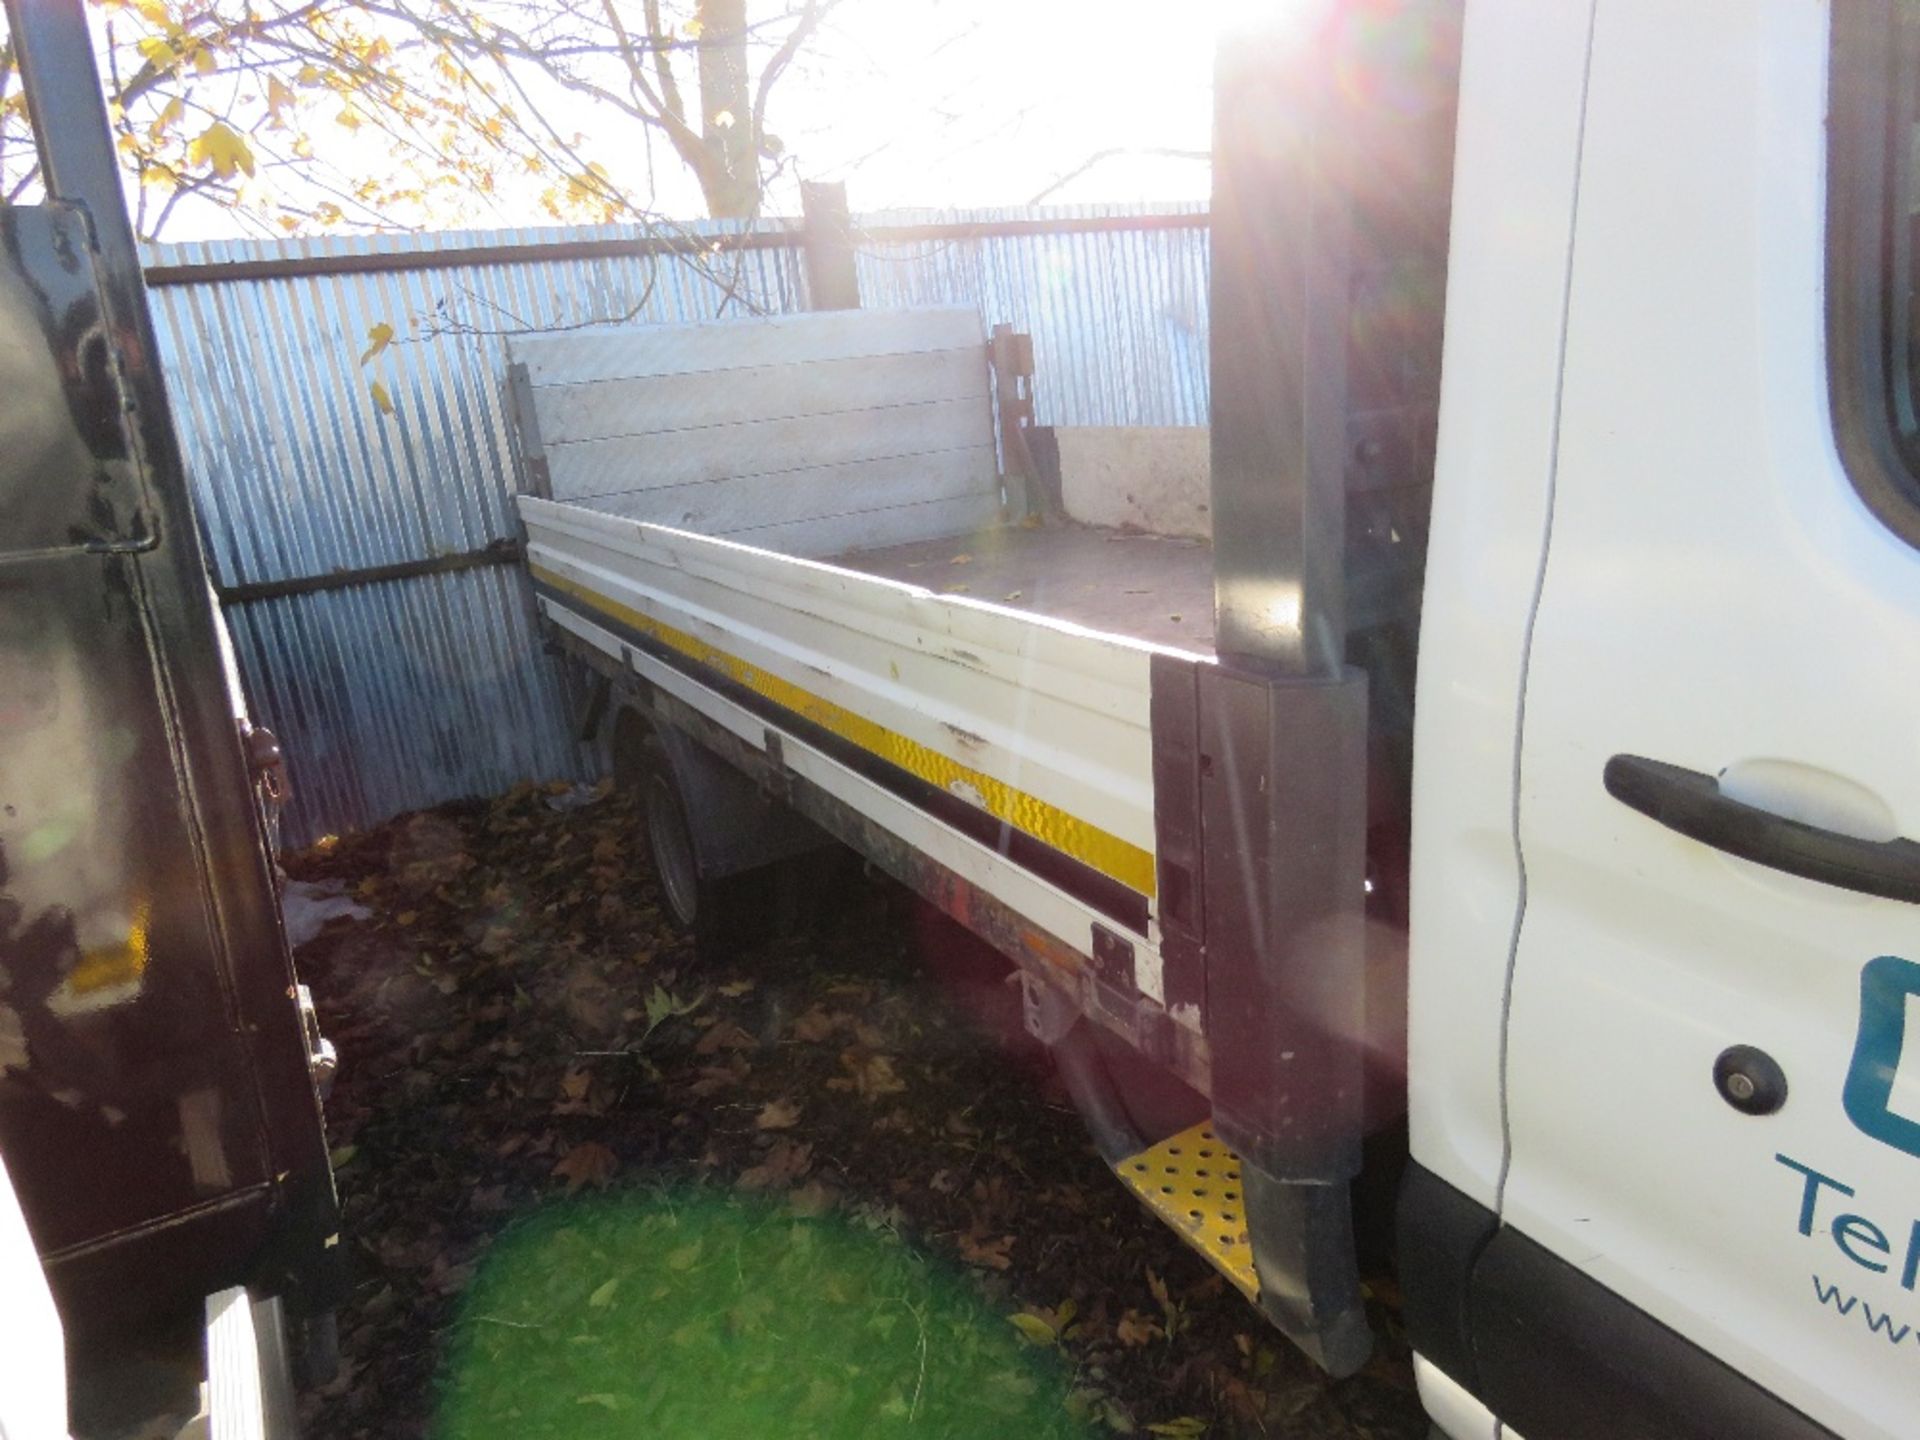 FORD TRANSIT 350 TWIN WHEEL 3.5TONNE DROP SIDE TRUCK WITH REAR TAIL LIFT REG:GK15 YHV. 216,966 REC M - Image 10 of 10